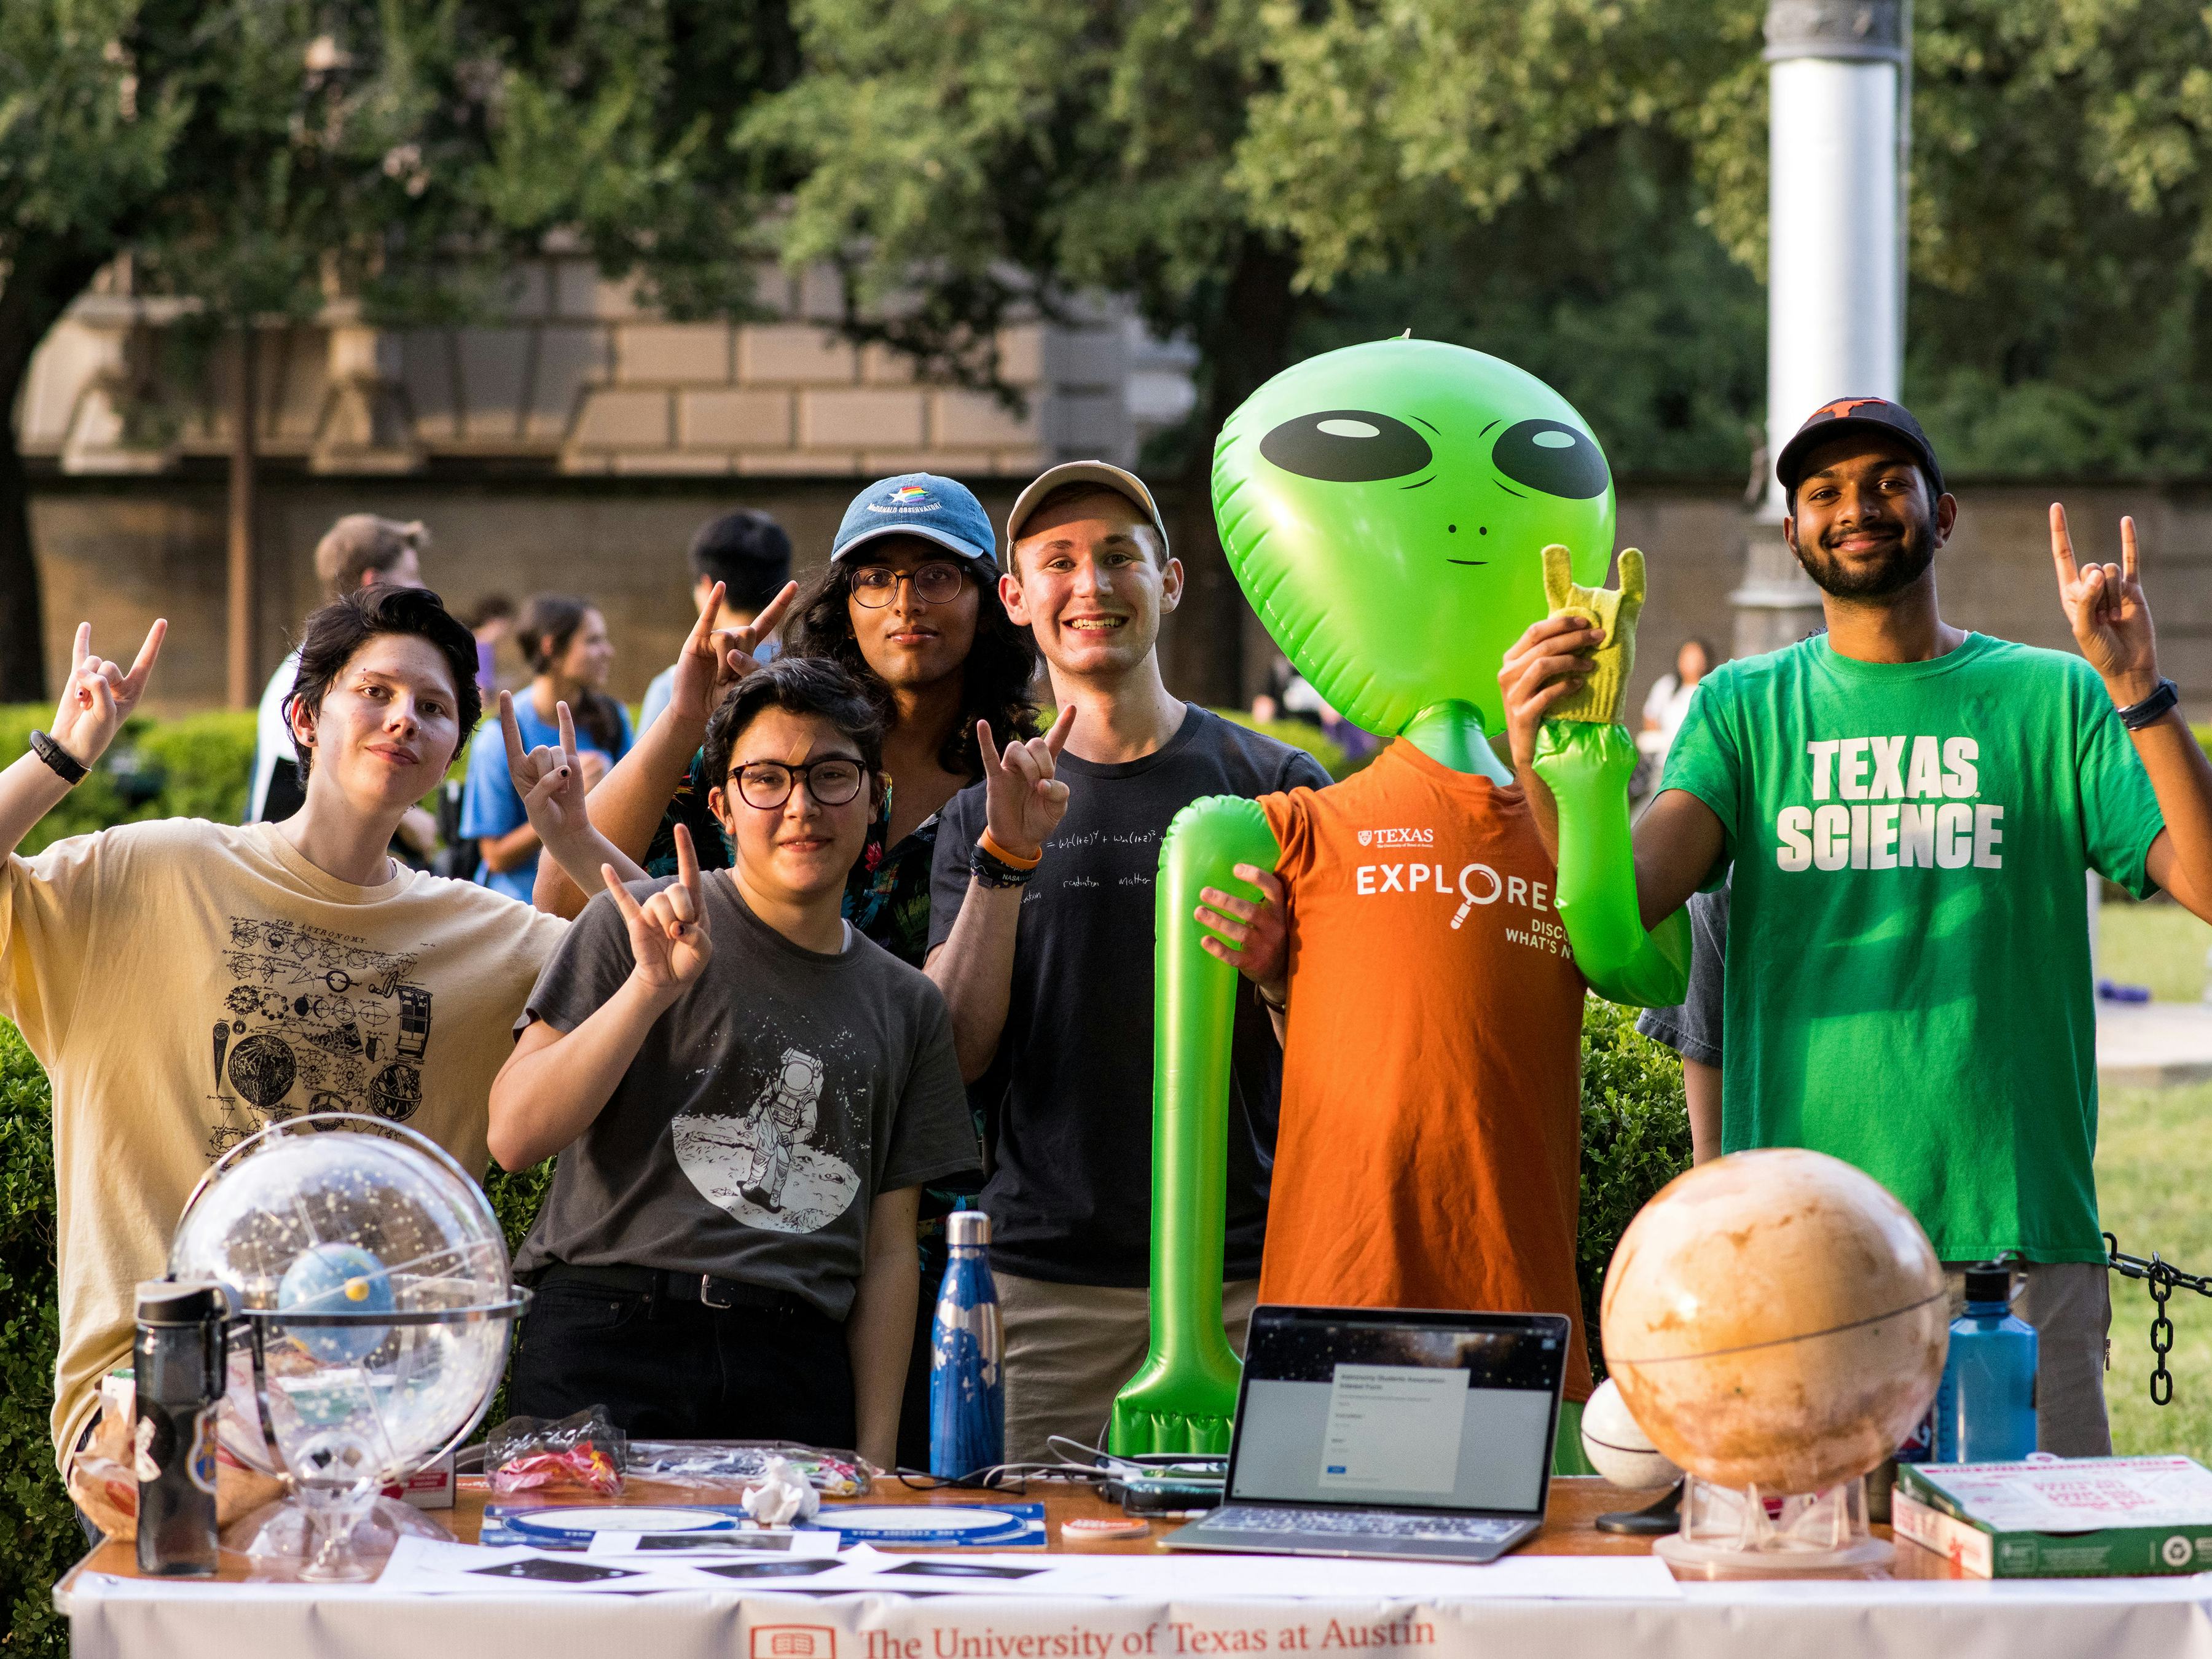 Physical sciences students tabling on the main mall. The students are gesturing Hook 'em hand gestures and posing with an inflatible green alien.